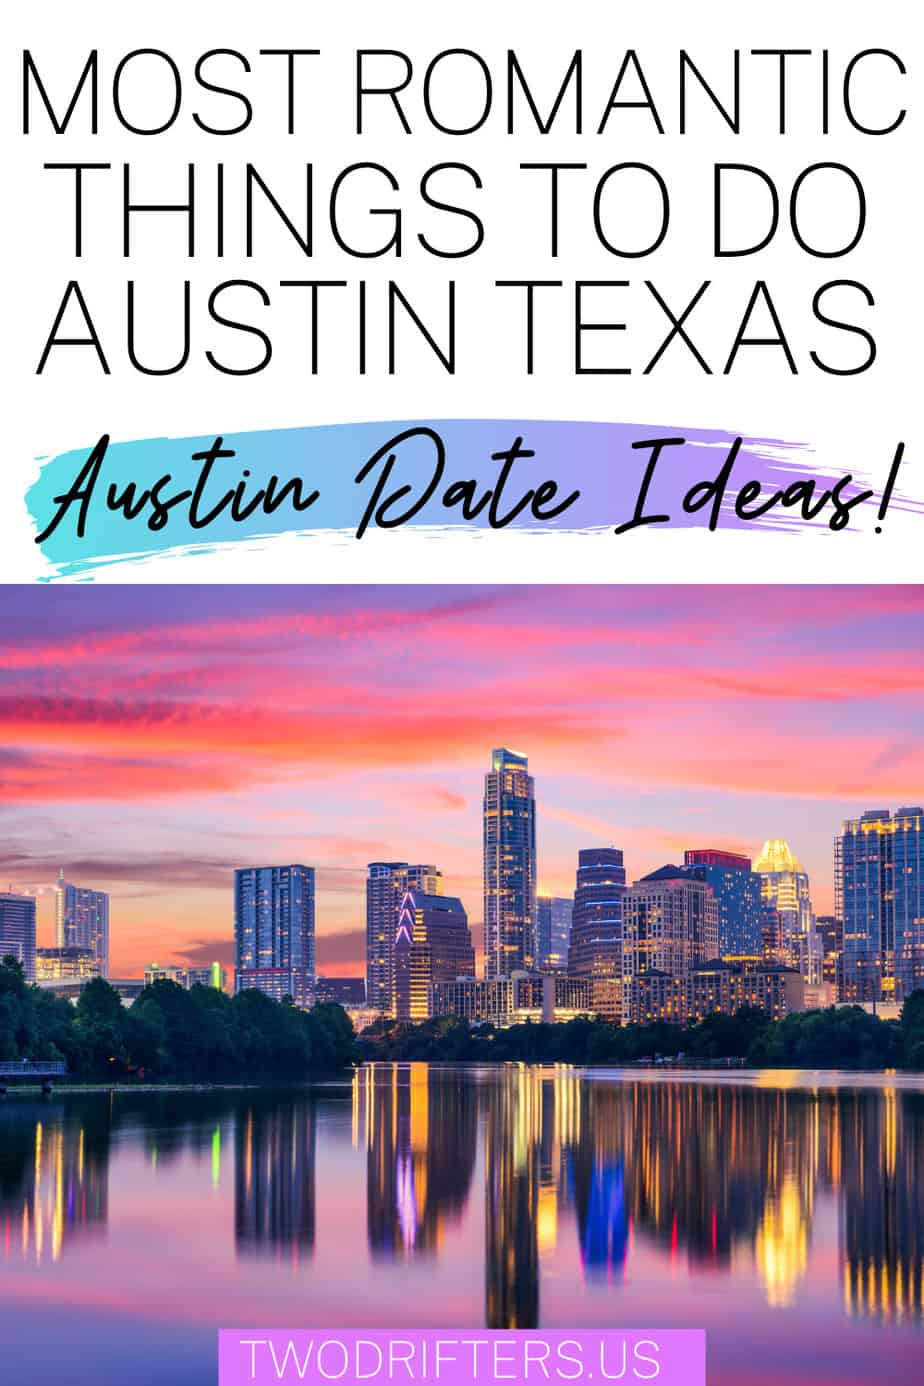 Pinterest social image that says “Most romantic things to do in Austin Texas. Austin date ideas!”